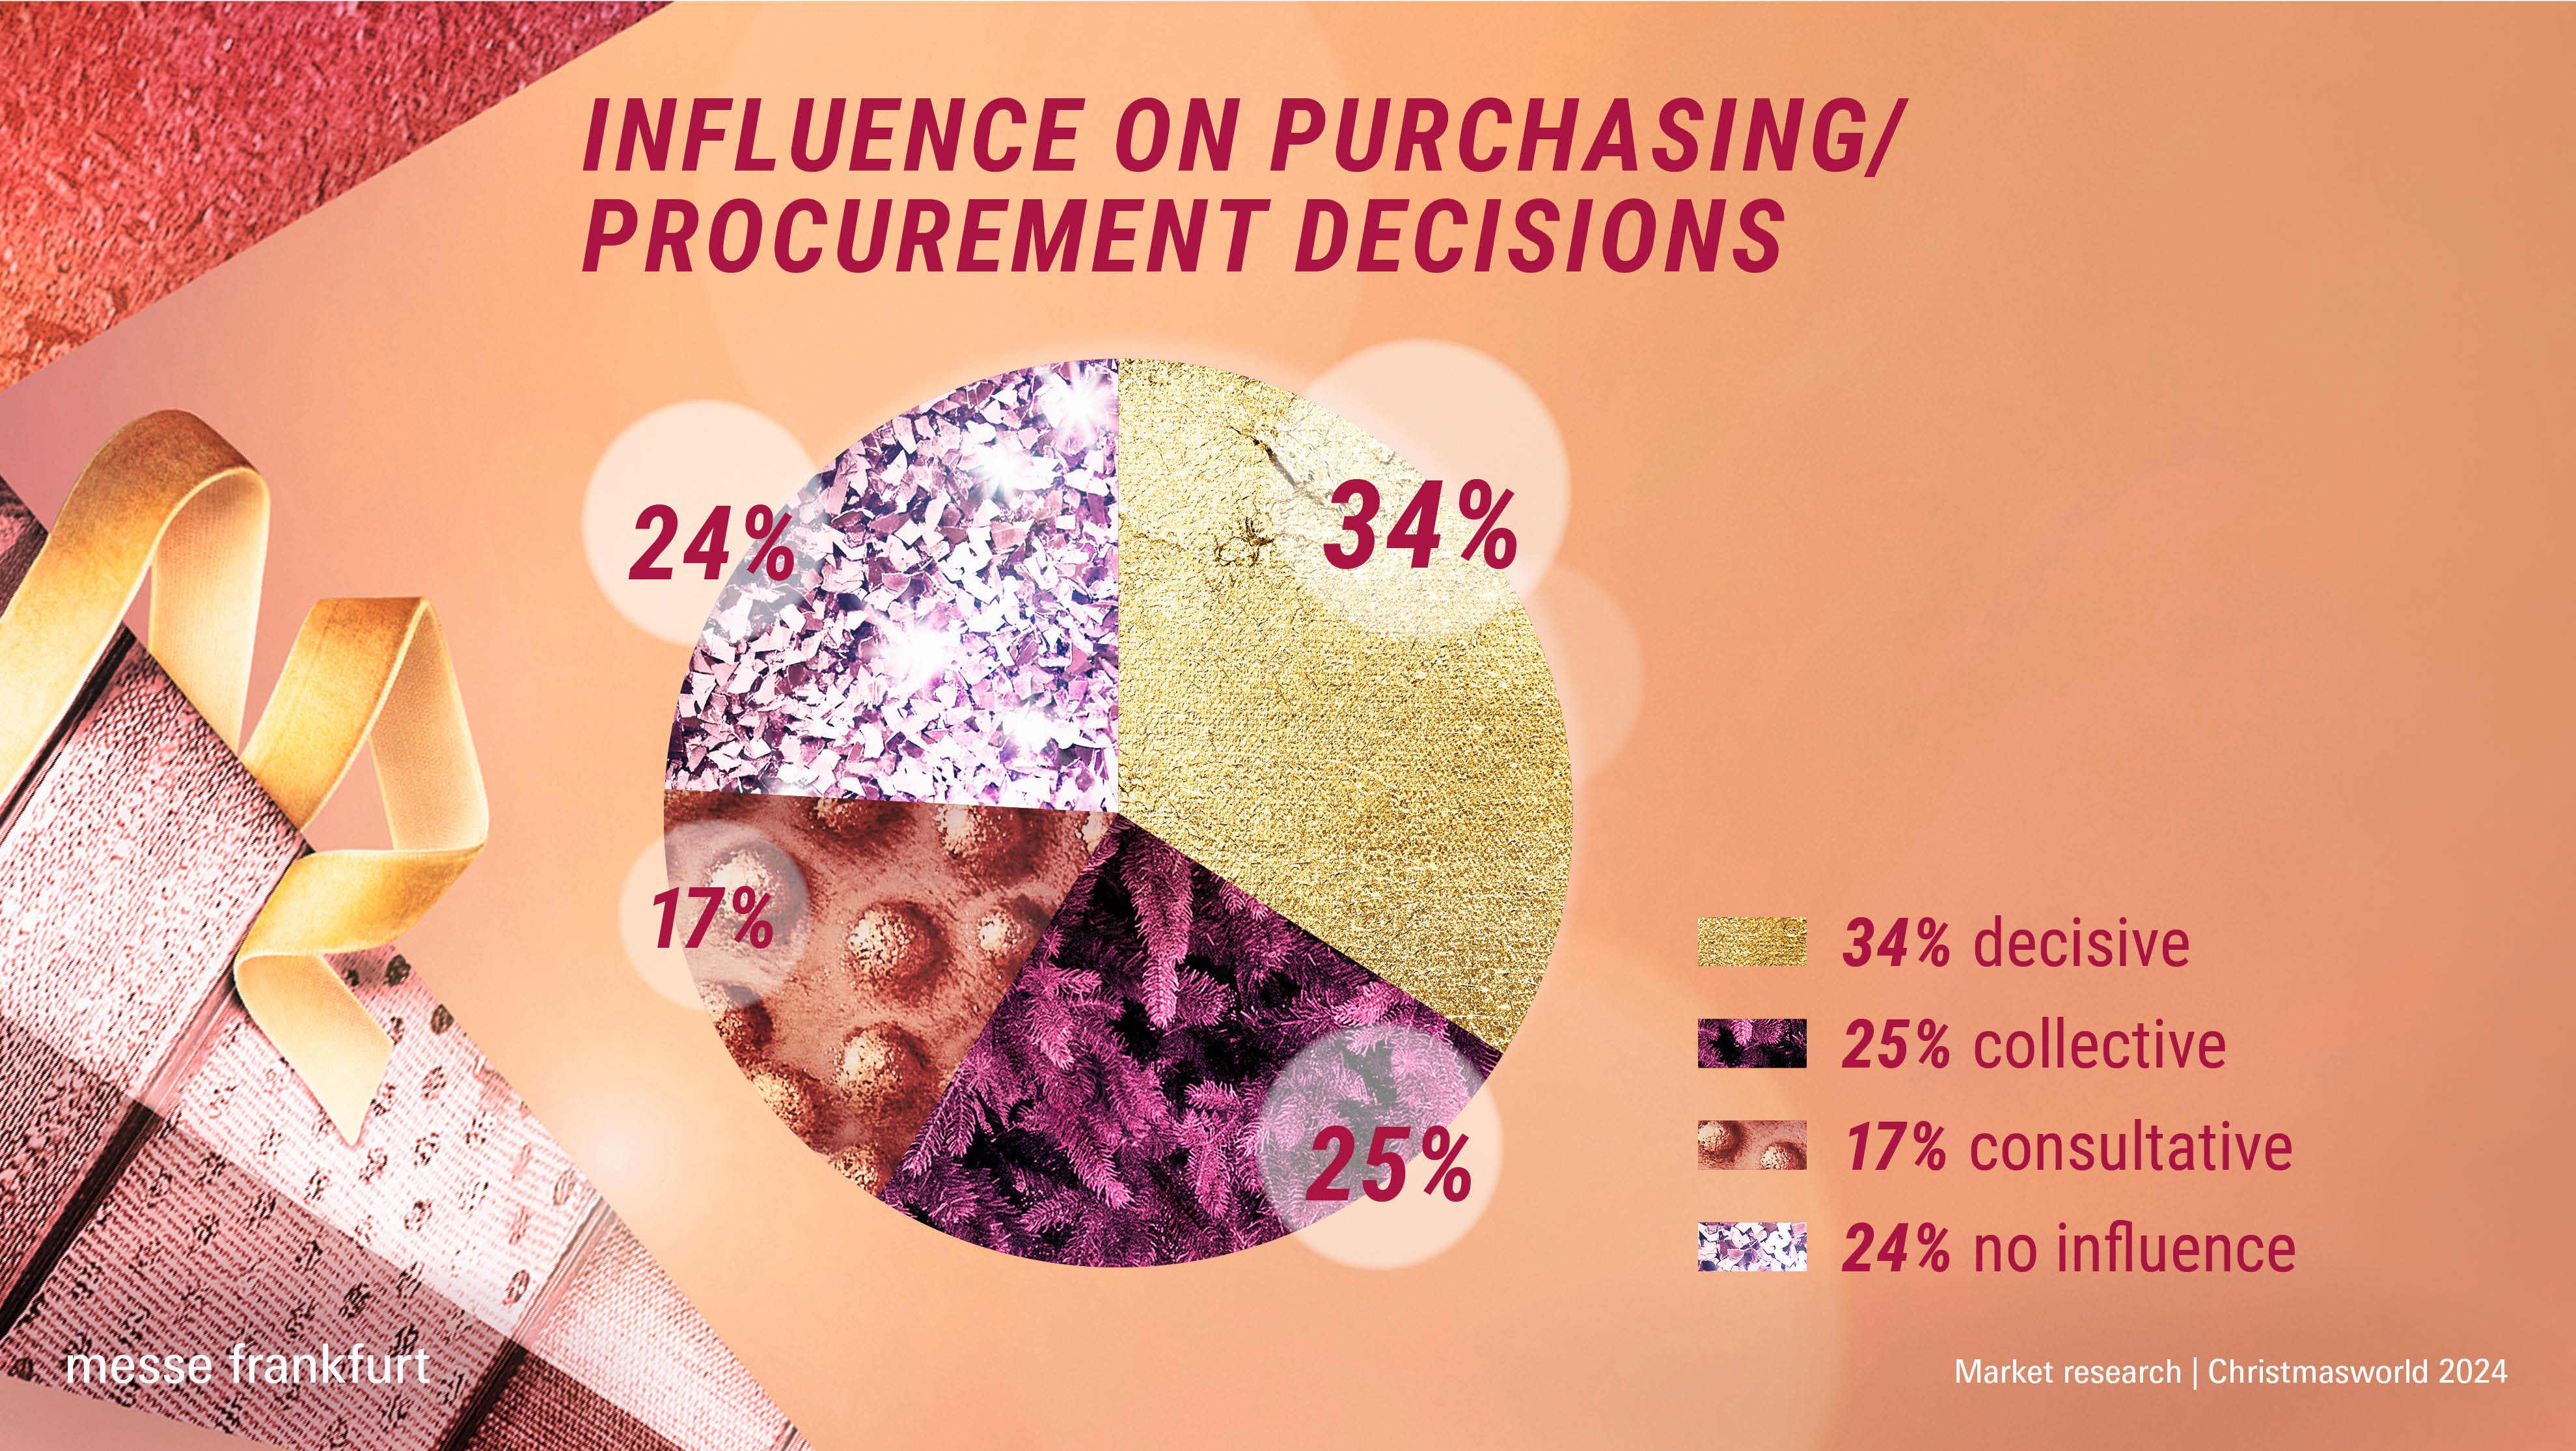 Christmasworld 2024: Influence on purchasing/procurement decisions